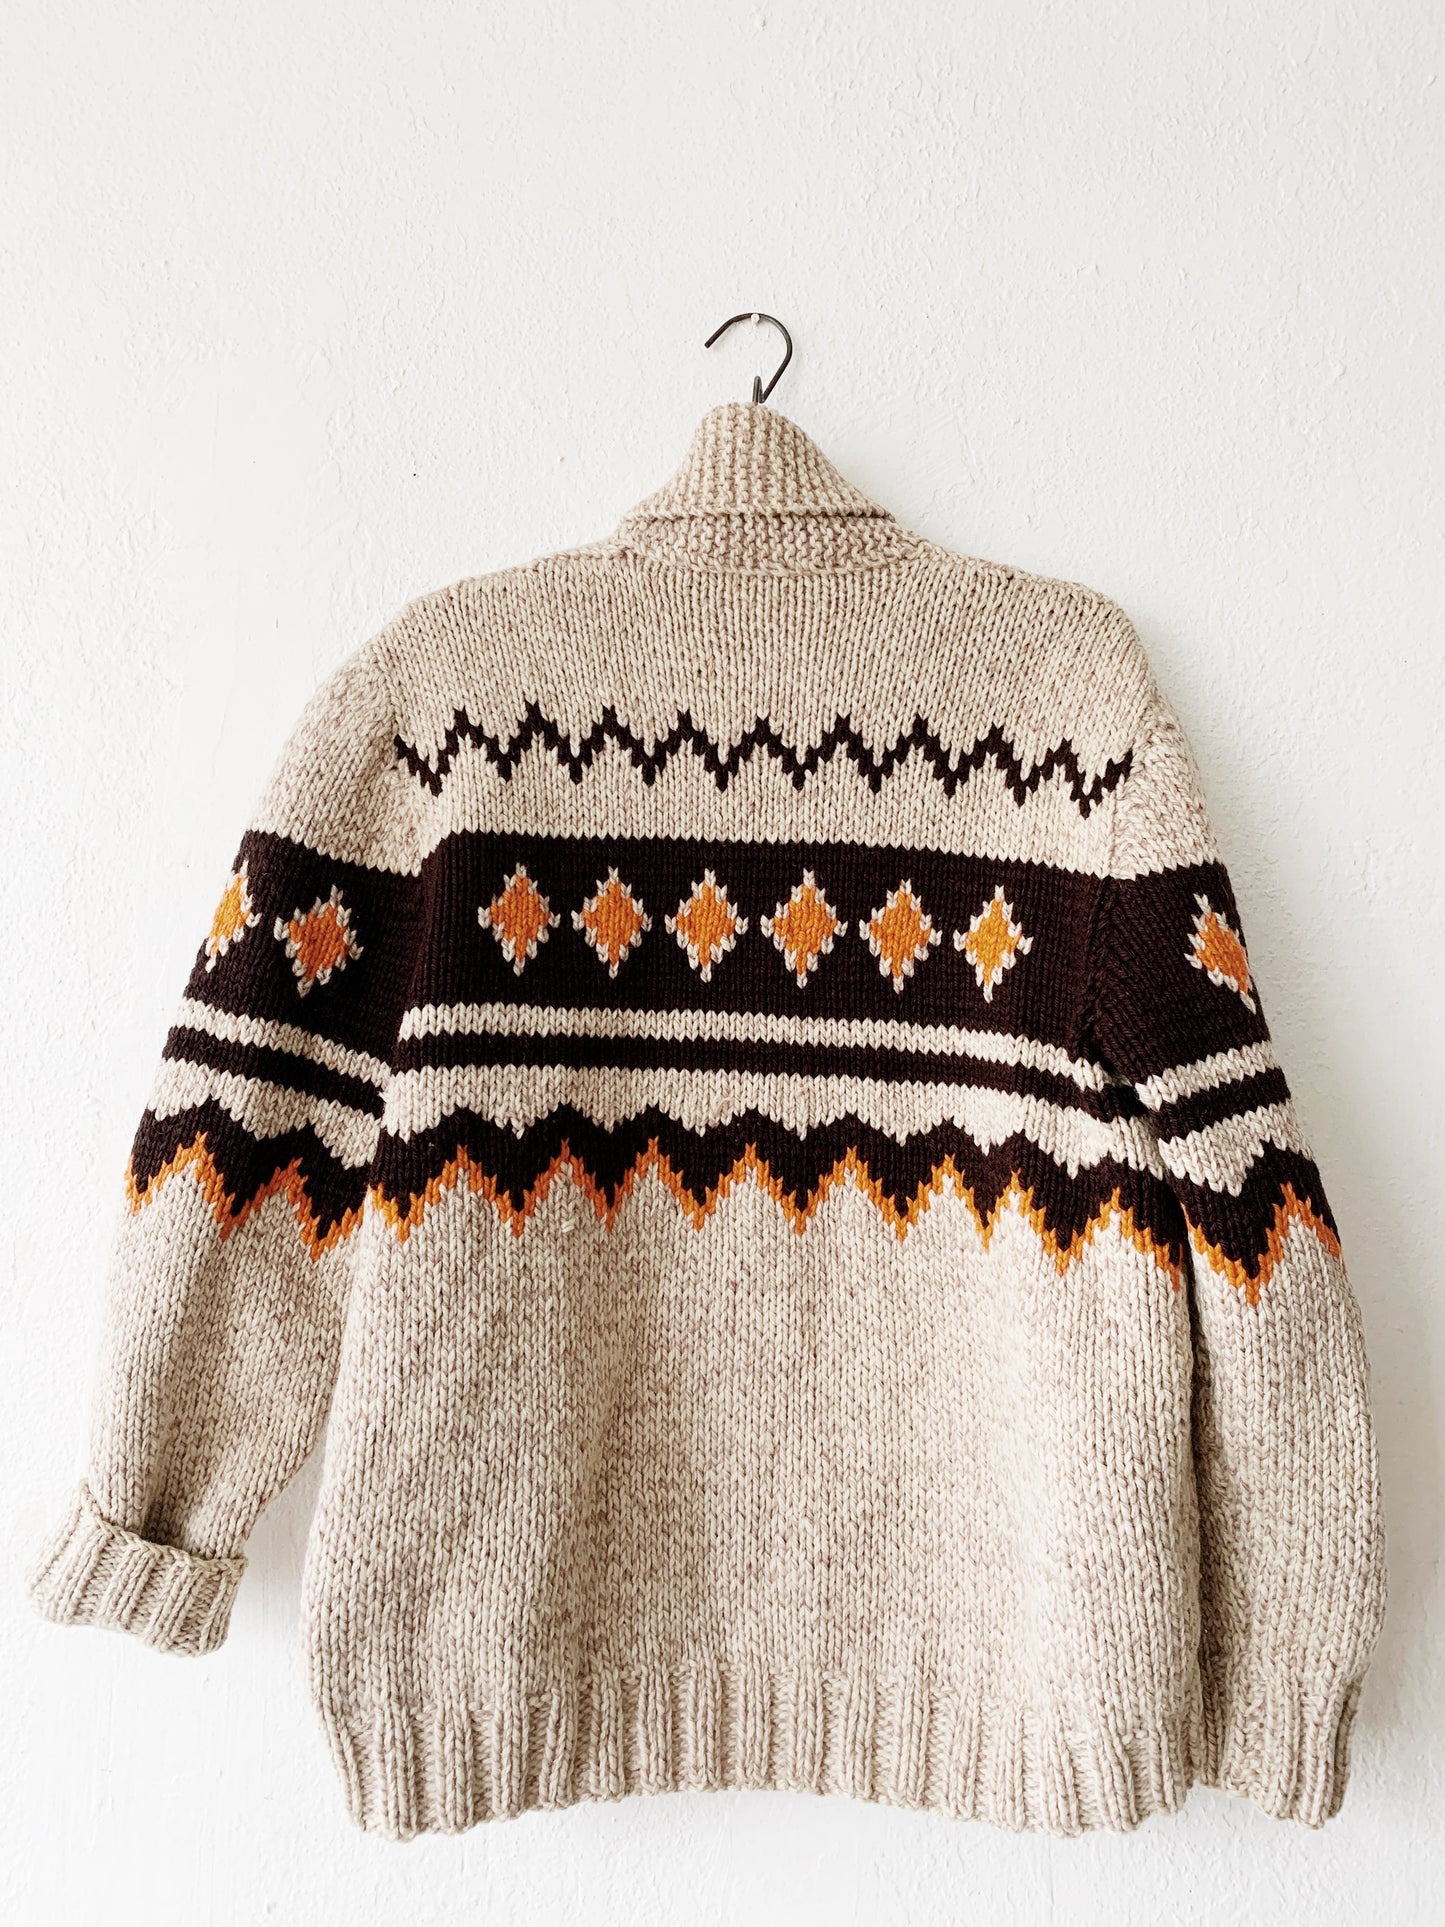 Vintage Hand Knit Cowichan Style Sweater